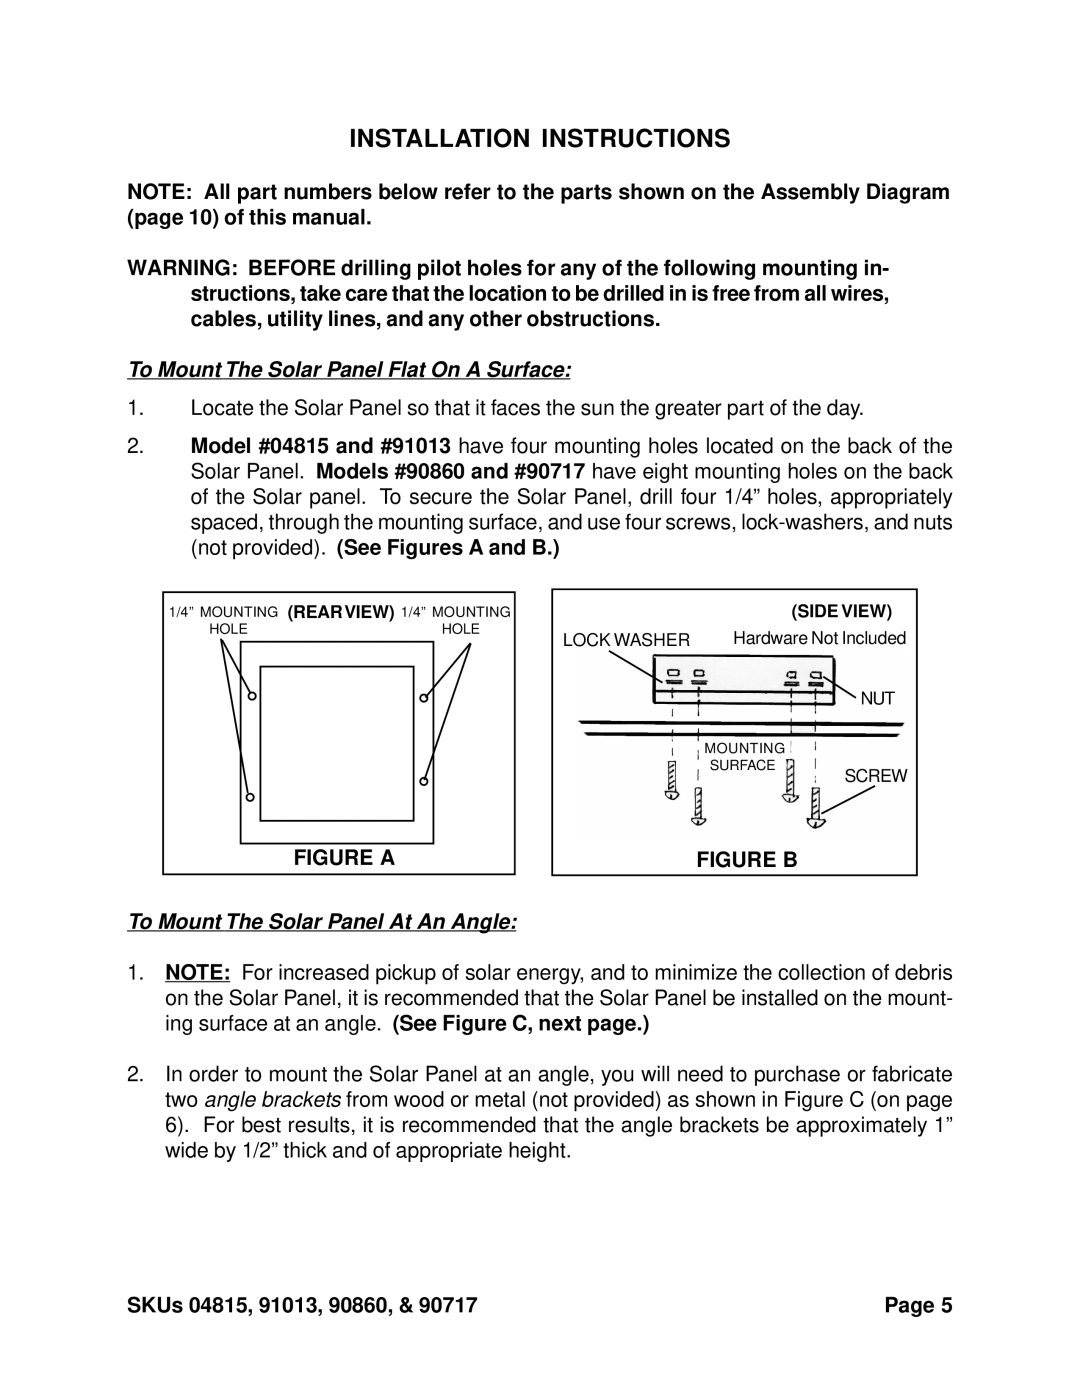 Harbor Freight Tools 91013 Installation Instructions, To Mount The Solar Panel Flat On A Surface, Figure A, Figure B, Page 